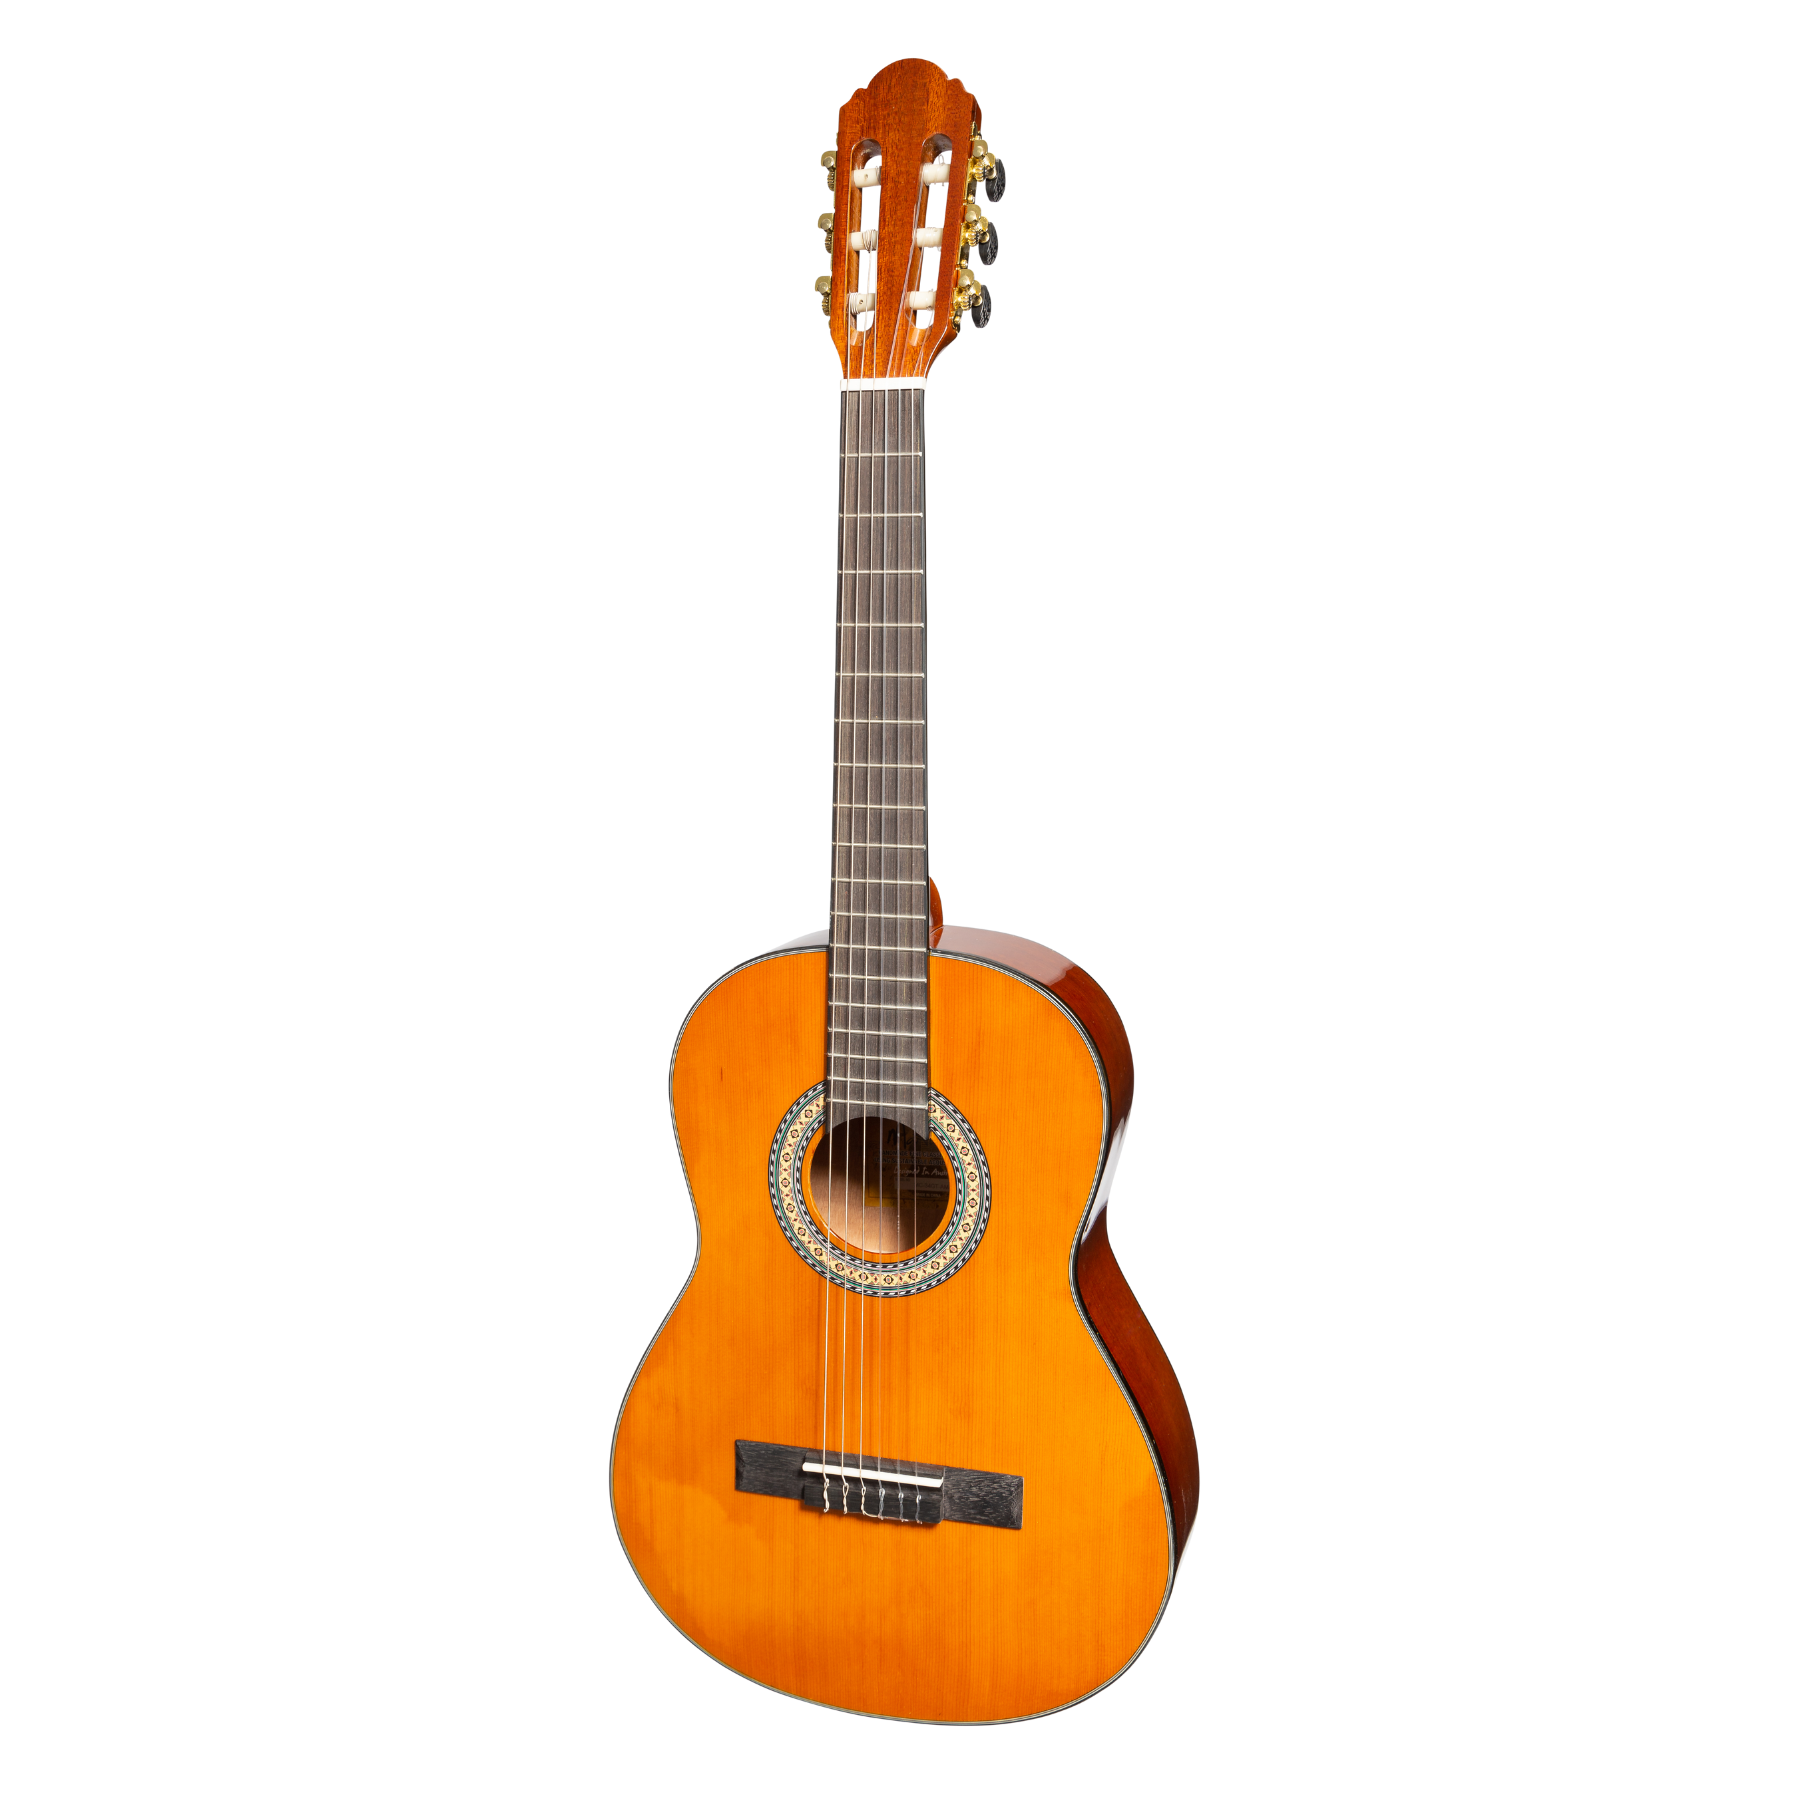 Martinez G-Series 3/4 Size Electric Classical Guitar with Tuner (Amber-Gloss)-MC-34GT-AMB